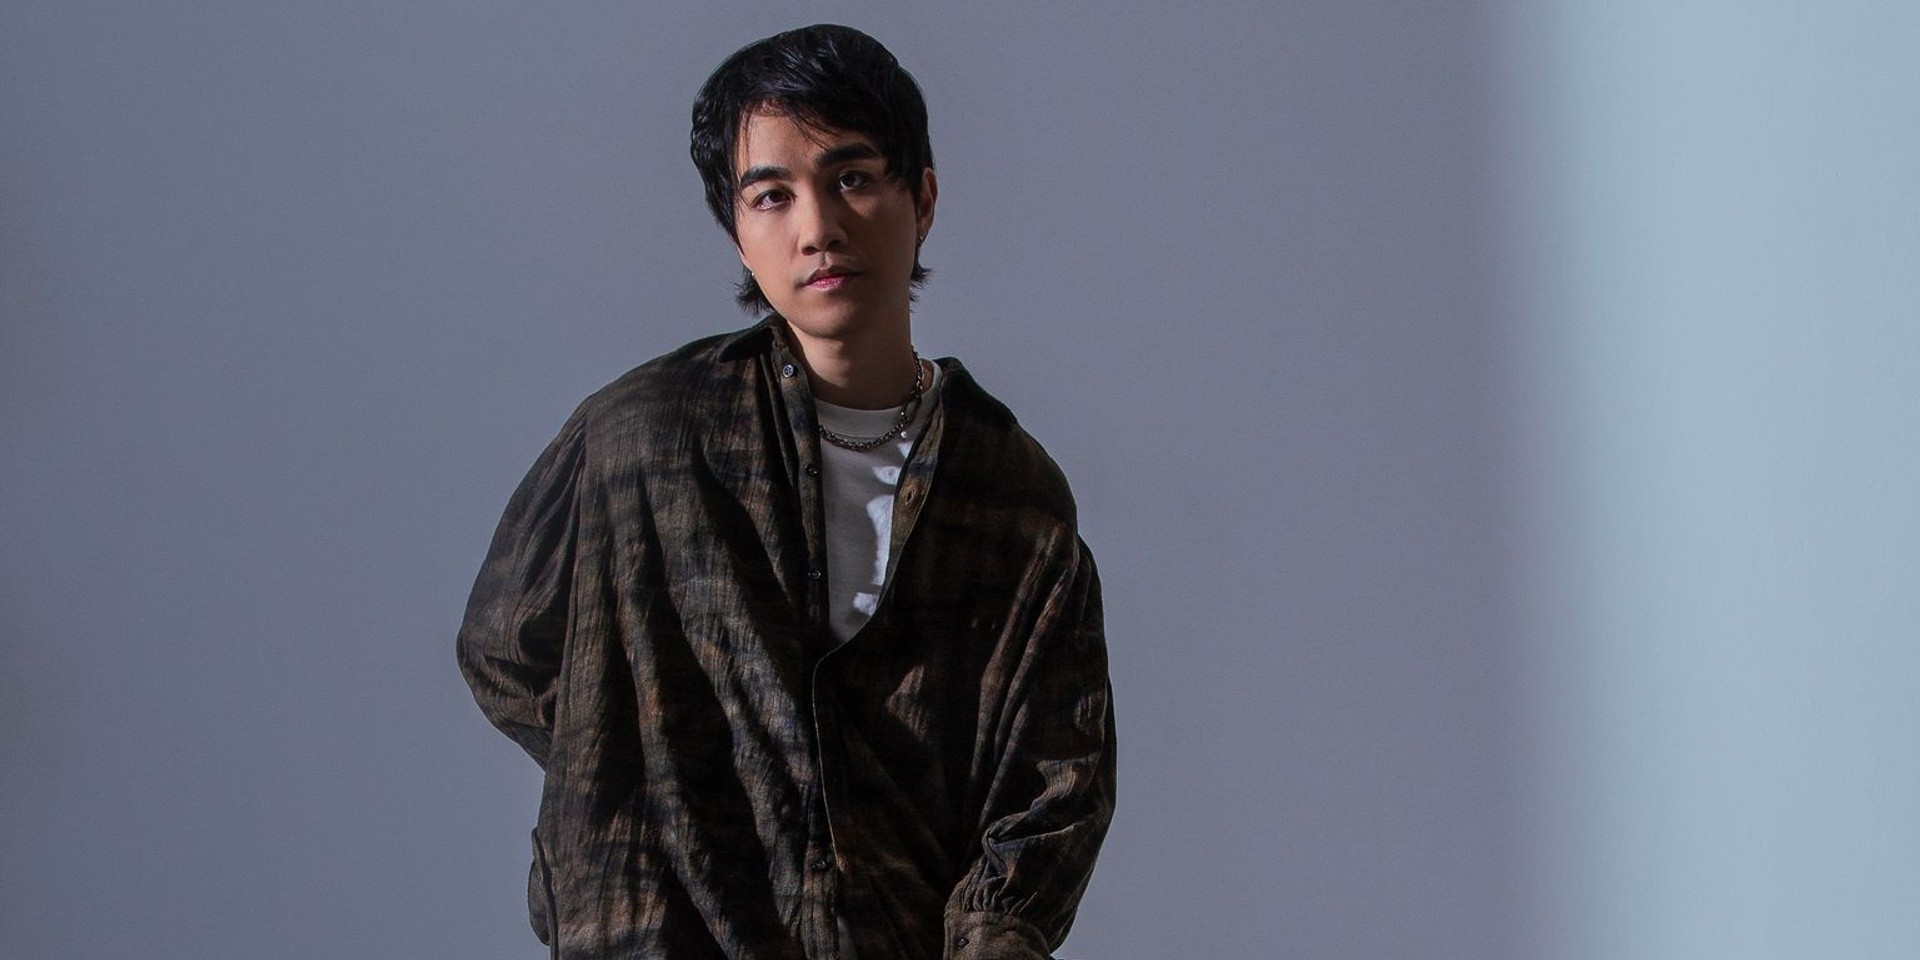 lullaboy celebrates his Indonesian roots in new single '3 new words' — listen